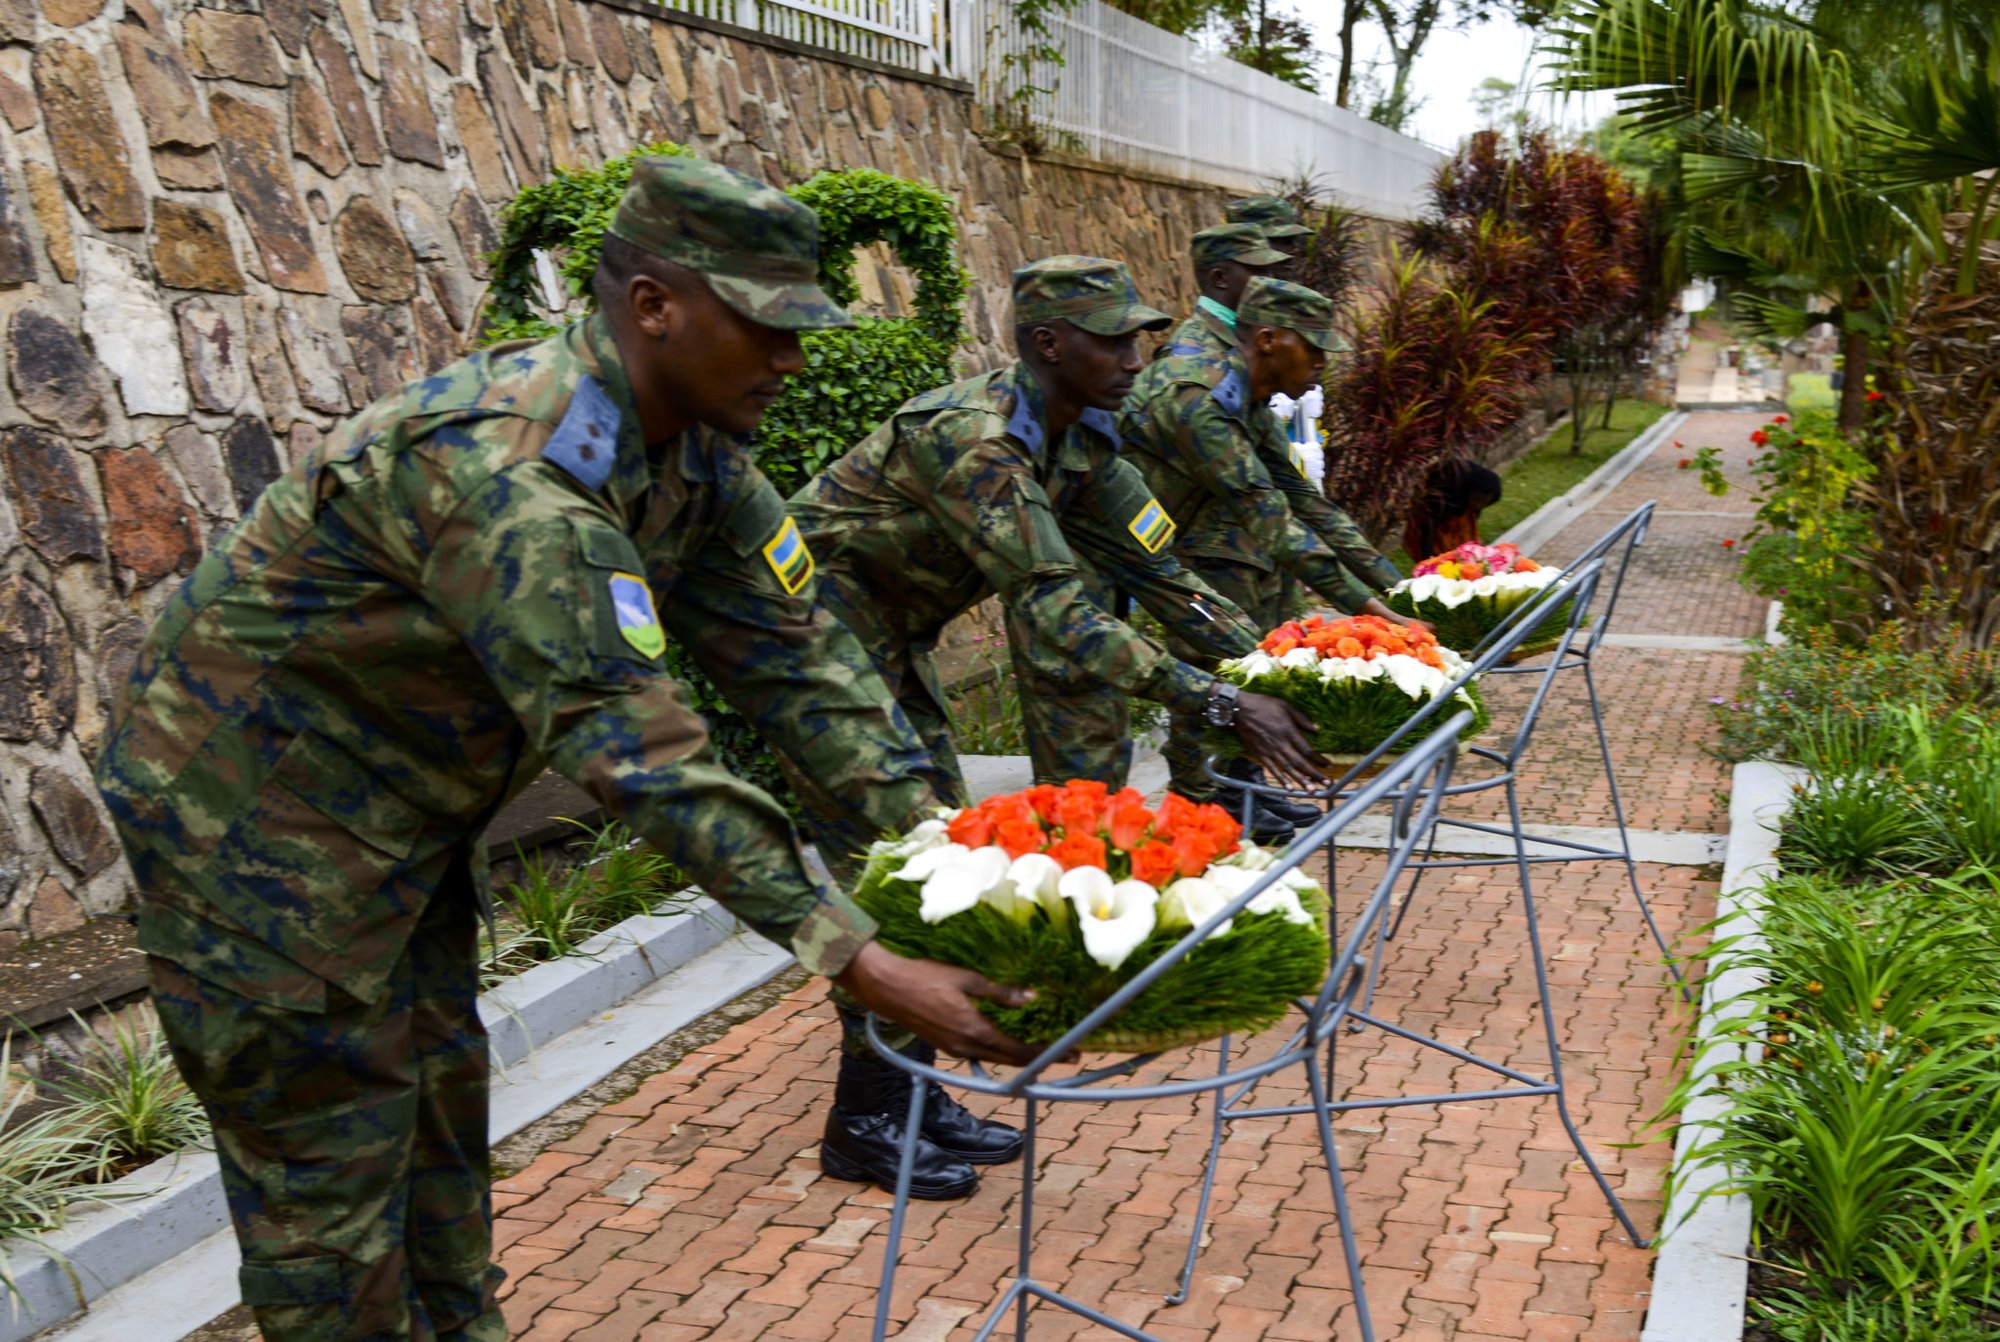 Members of the Rwanda Defence Force pick up wreaths during a wreath laying ceremony at the Kigali Genocide Memorial in Kigali, Rwanda, March 4, 2019. The memorial is one of more than 200 memorials throughout Rwanda. (U.S. Air Force photo by Tech. Sgt. Timothy Moore)